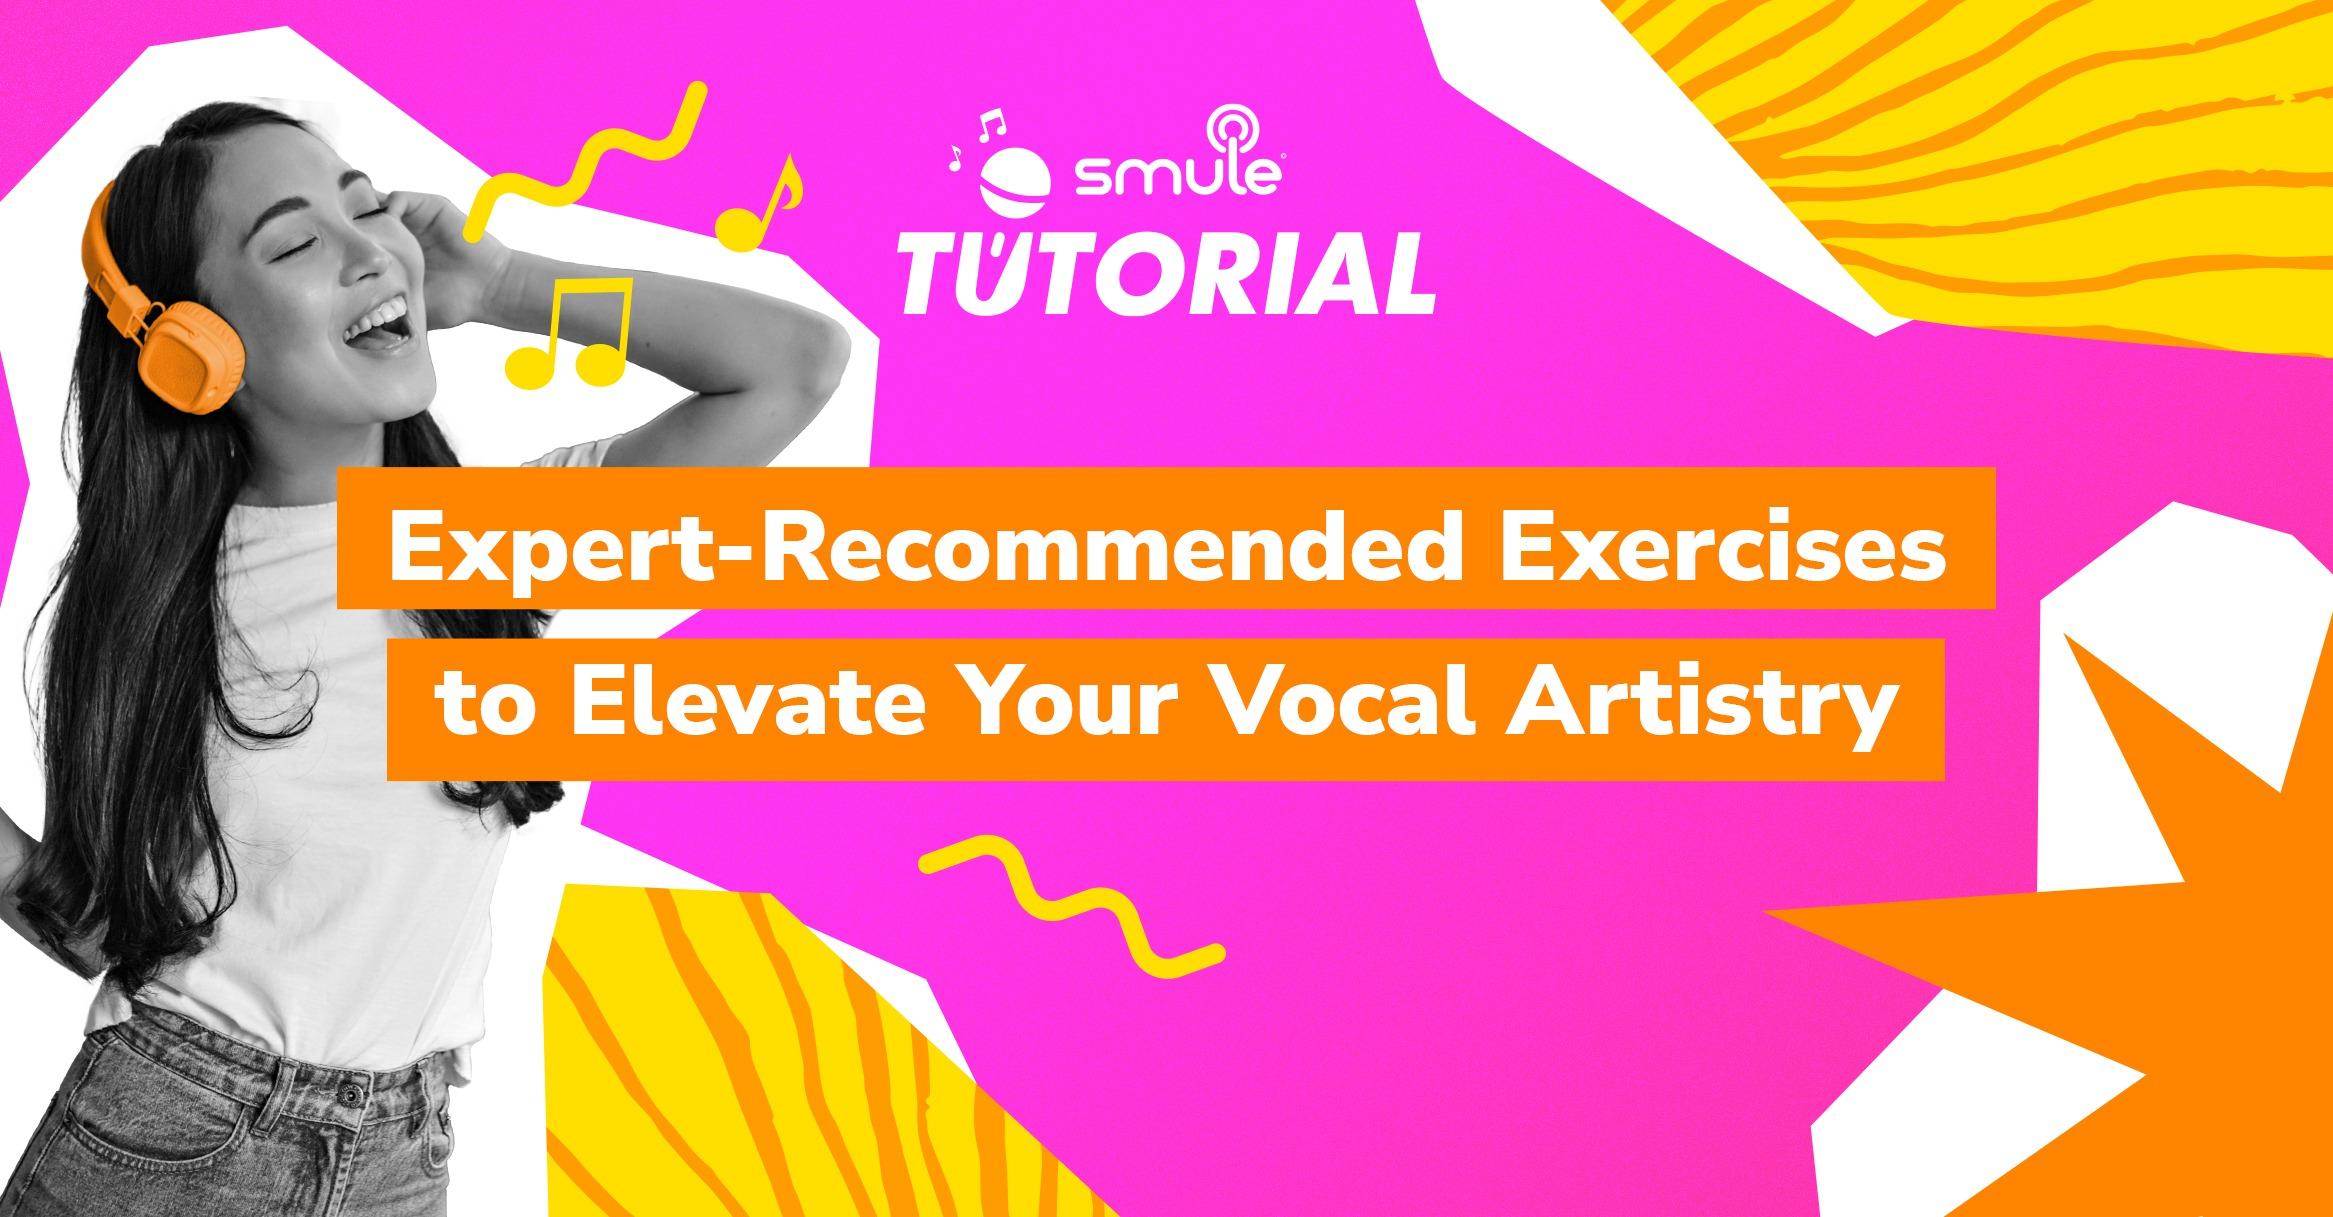 Develop Your Vocal Artistry Like an Expert